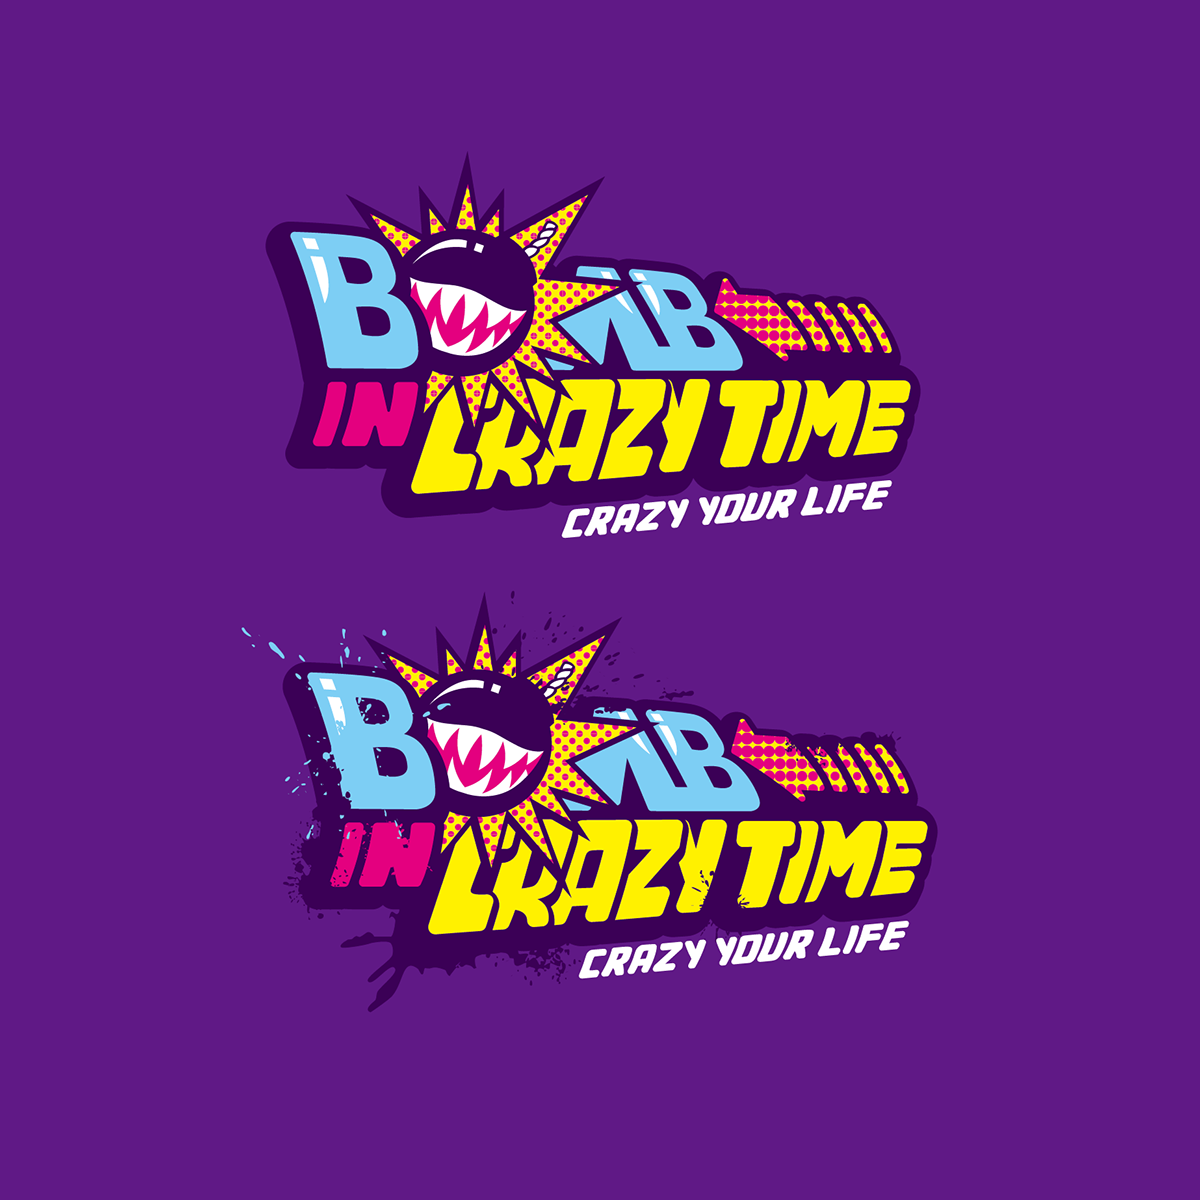 CRAZYBOMB Illustrator Back in Crazy Time back to the future crazy bomb 瘋狂 炸彈 瘋狂炸彈 taiwan 台灣 back to school bttf 回到未來 品牌